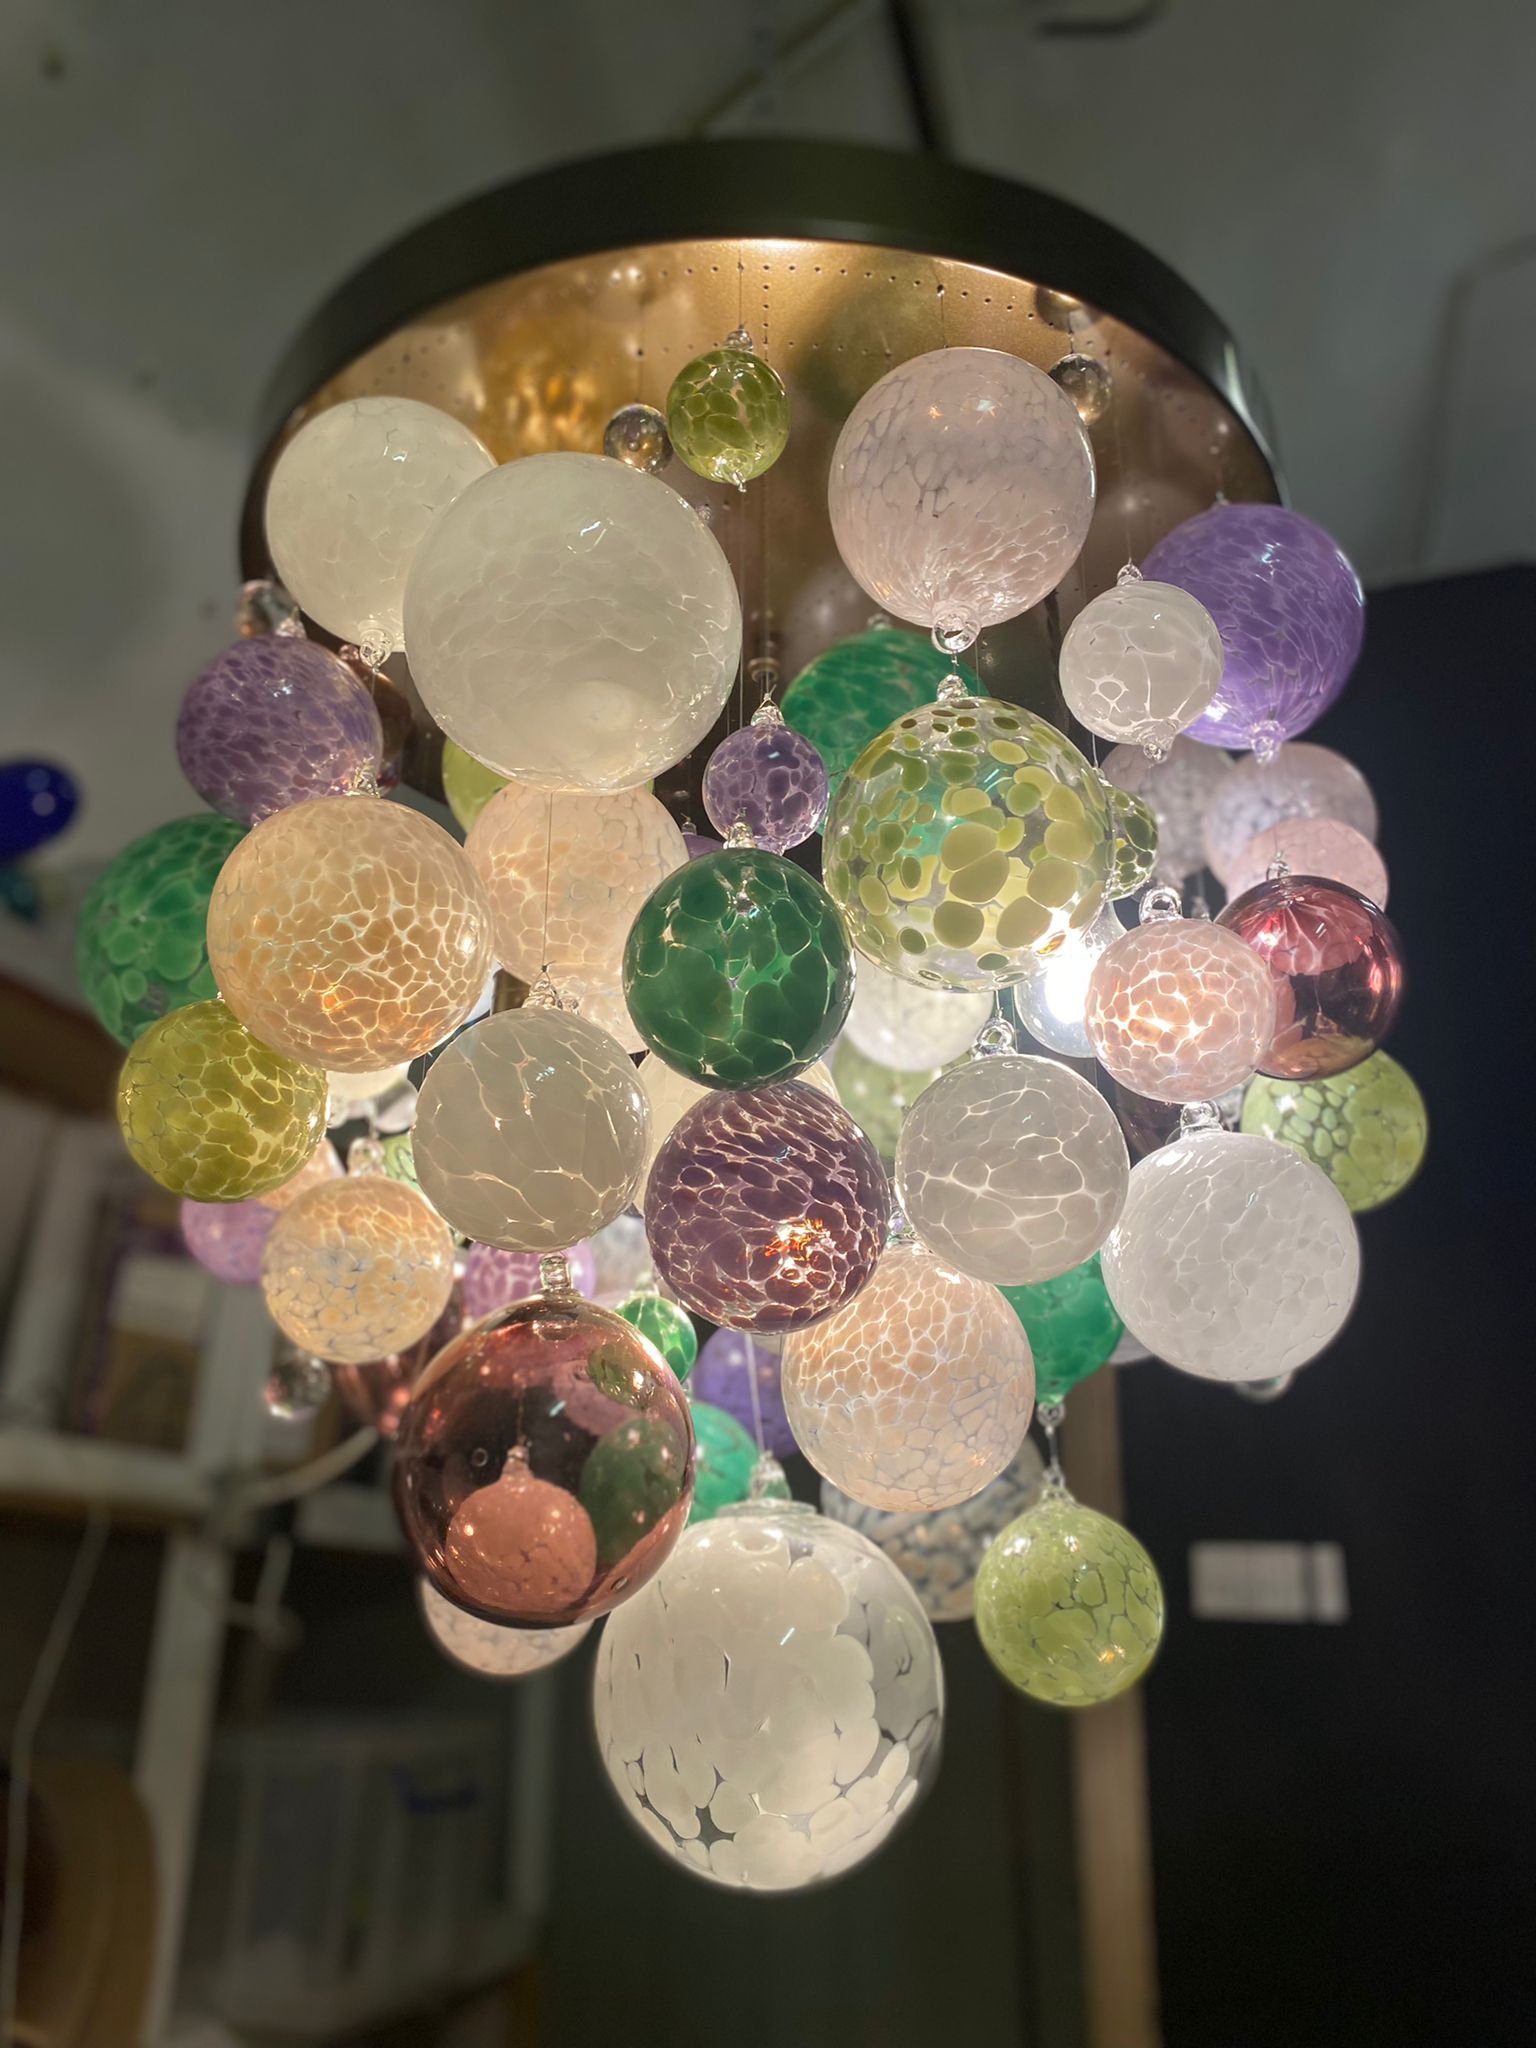 This contemporary chandelier is an origin II design and features over 50 individually blown glass spheres. The glass is blown in Europe and the UK and the chandelier is designed and handcrafted in our studio in South London. 

This chandelier is